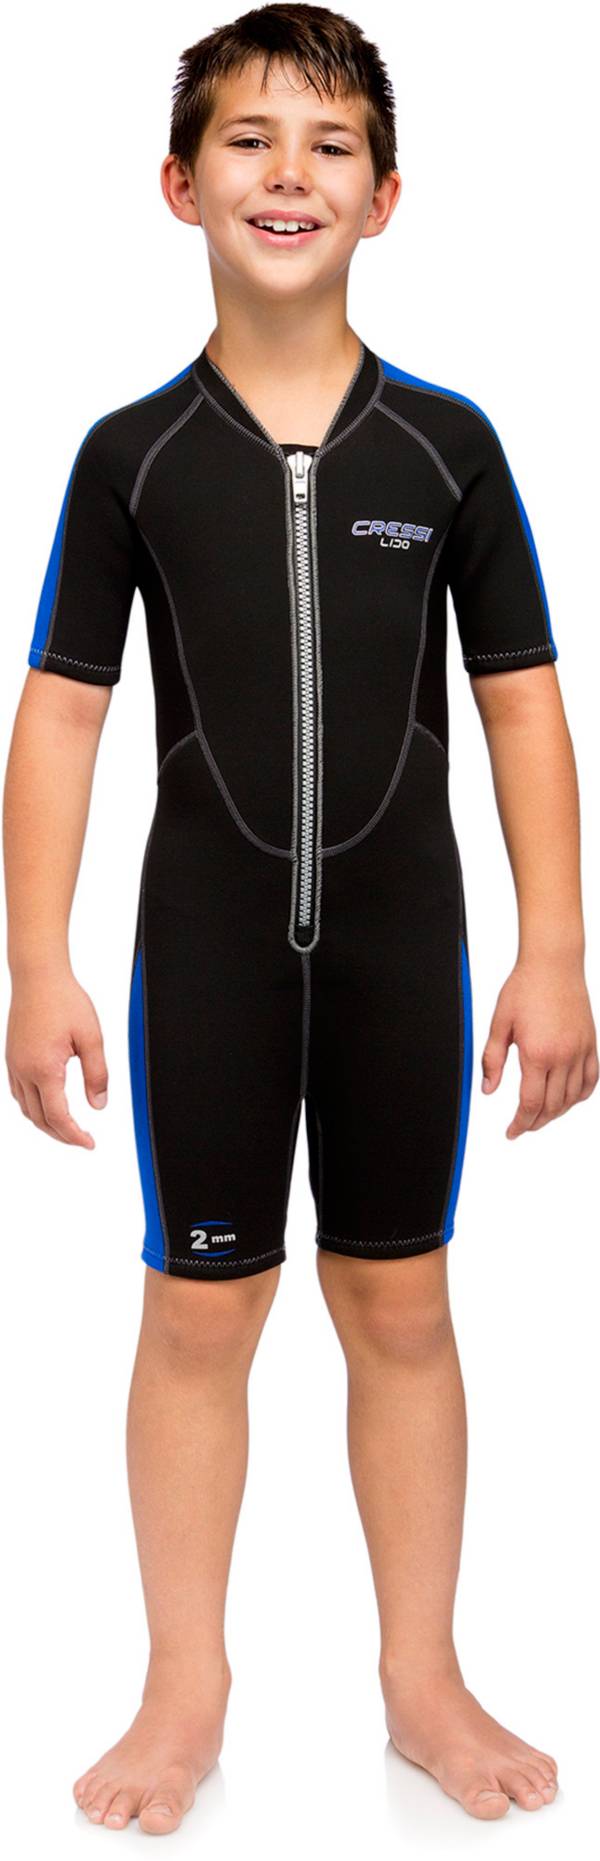 Cressi Youth Lido Junior Wetsuit product image